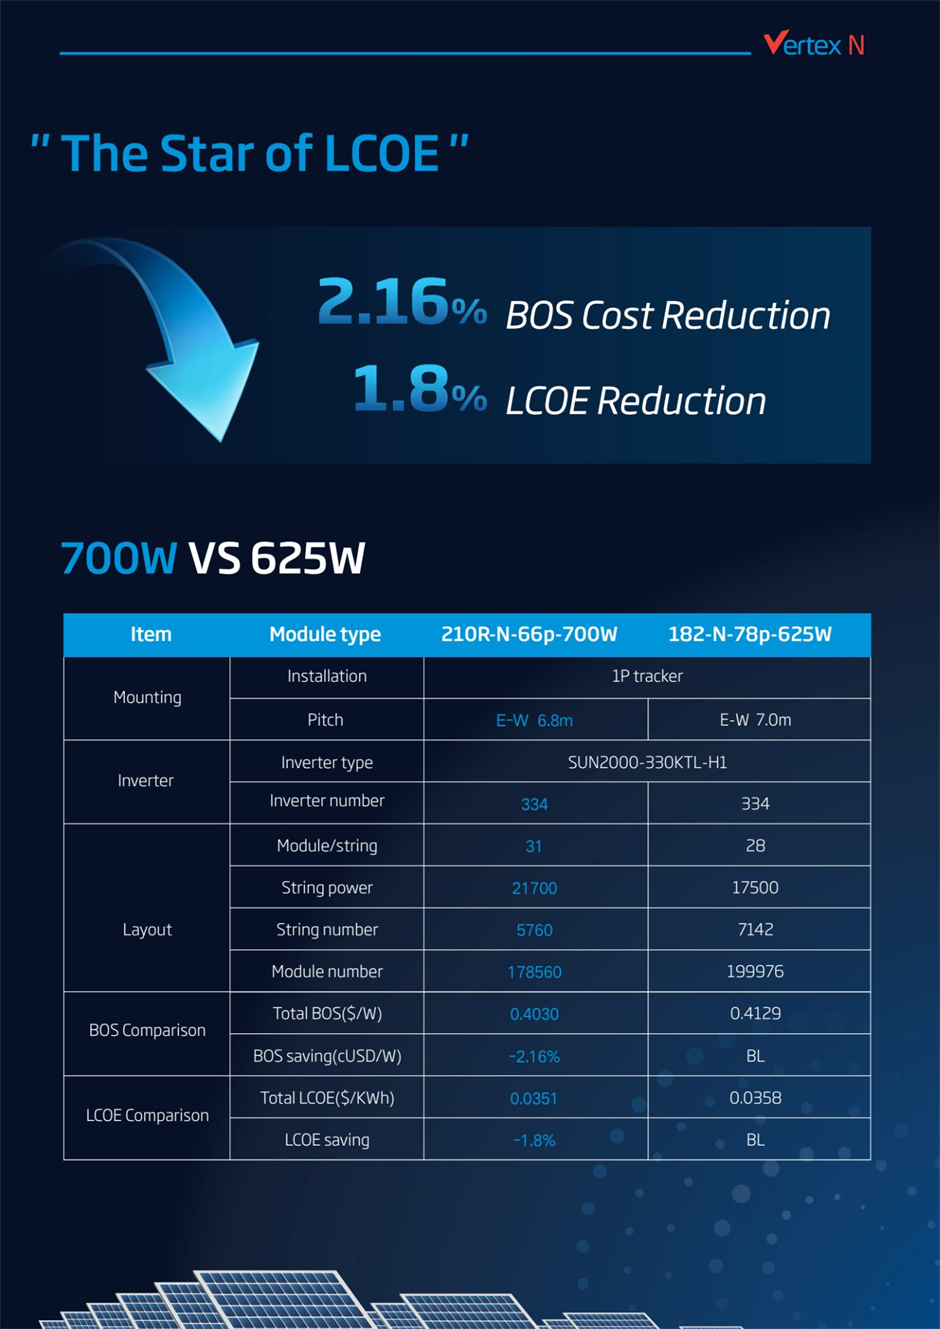 A deep dive into the comparison between the Vertex N 720W+ bifacial solar module and similar module to showcase the LCOE and BOS cost savings through the mounting, inverters, and layout used in the 125 MW case study.
